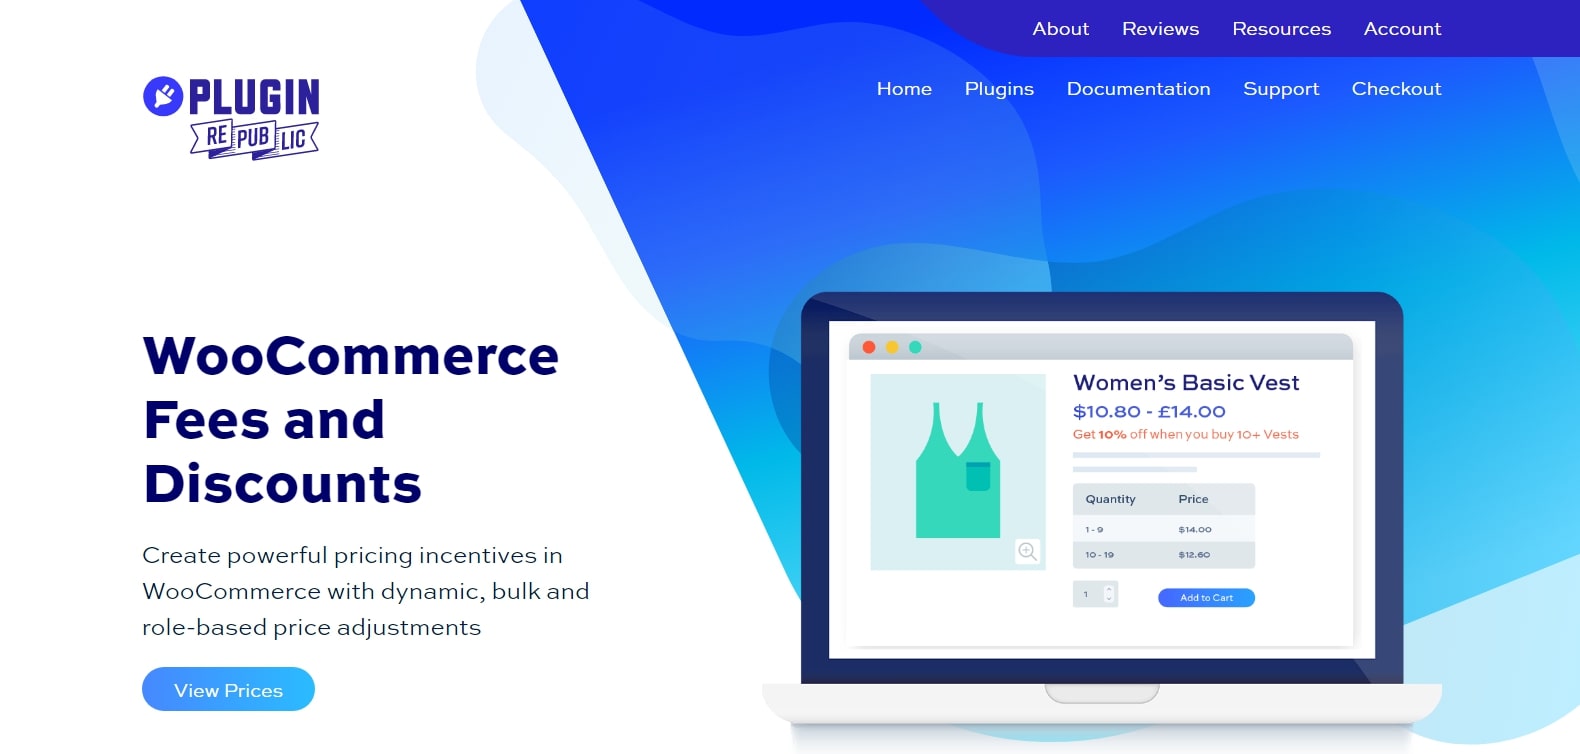 WooCommerce Fees and Discounts